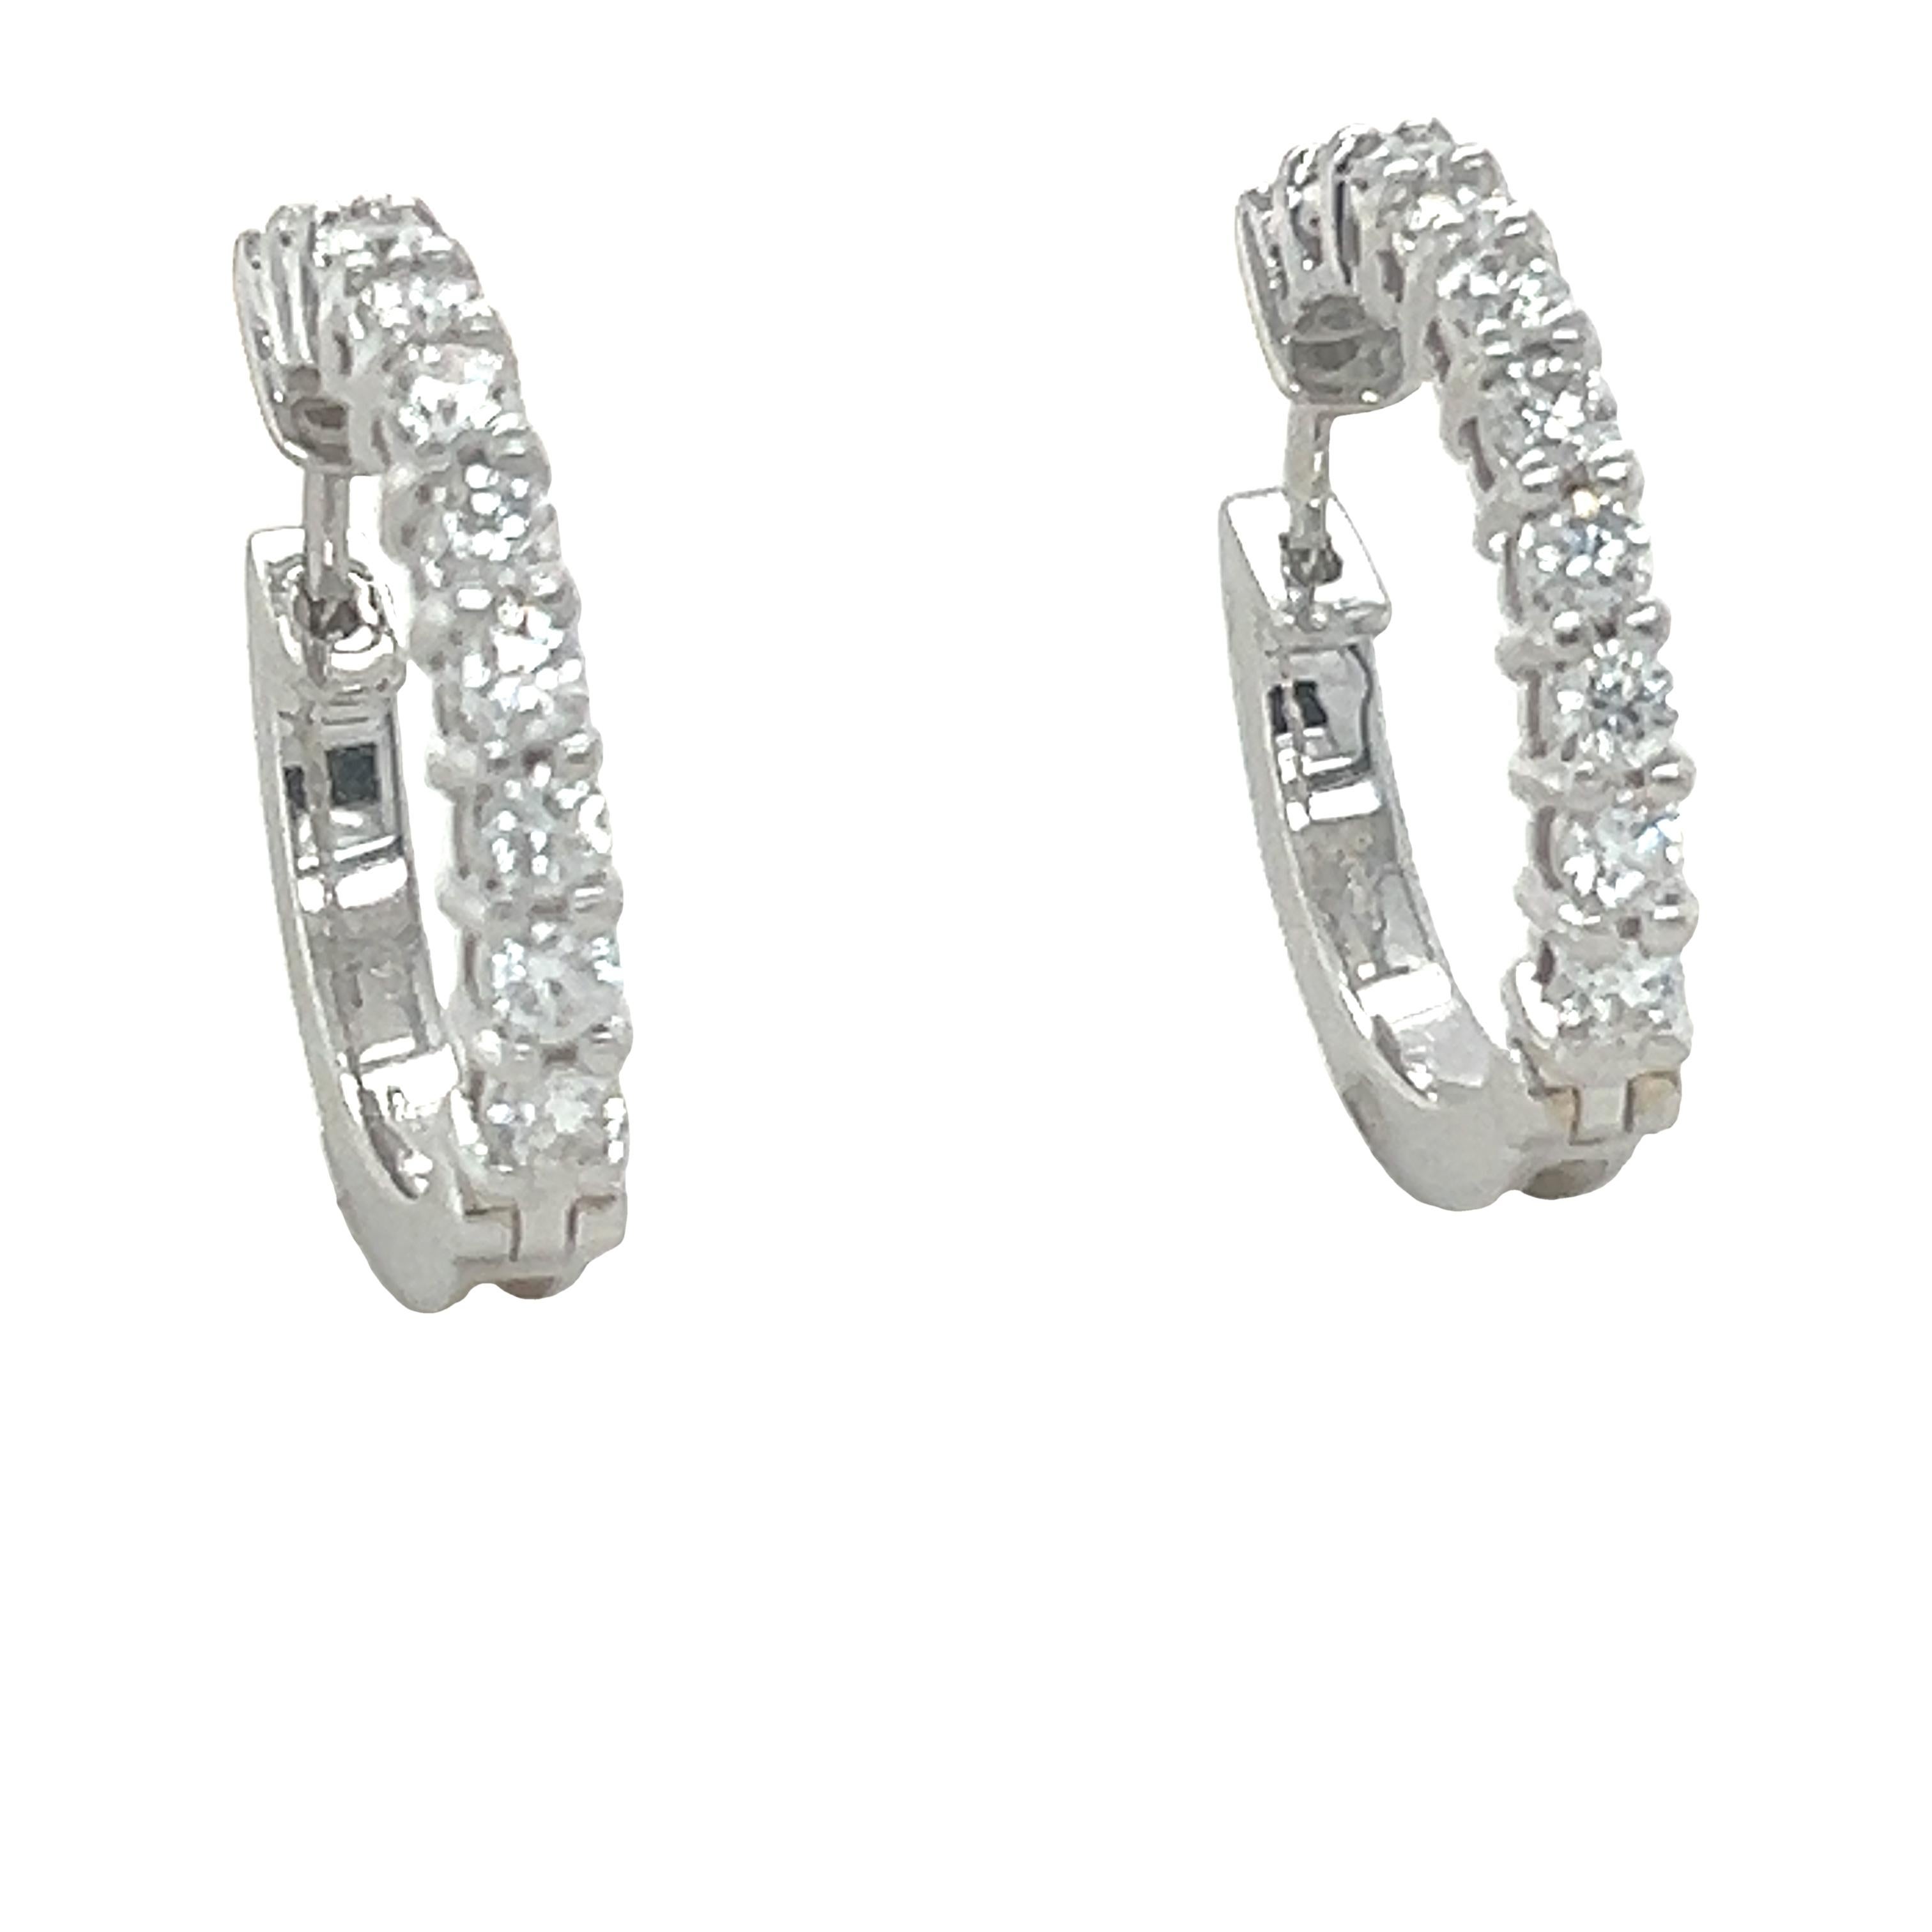 A pair of Gregory Diamond hoop earrings made of 18ct White Gold, and weighing 8.8 gm. Stamped: 750.

The earrings are set with 20 round, brilliant cut Diamonds, colour F-G and clarity VS-SI. with a total weight of 1.50 ct.

Metal: 18ct White